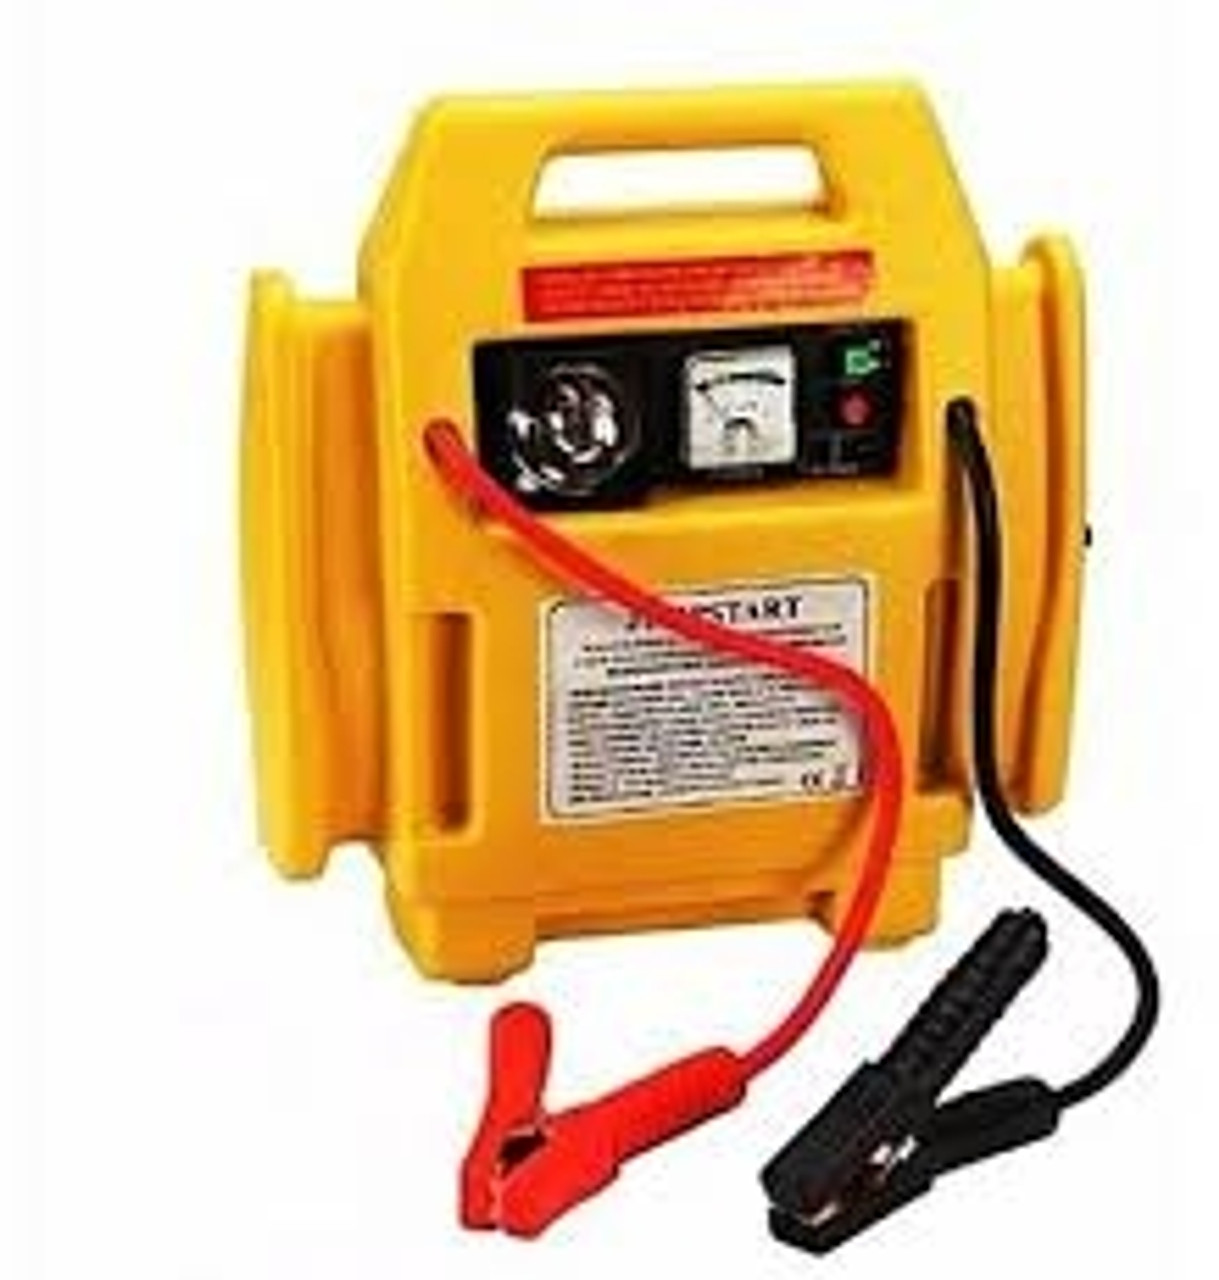 Buy 4-In-1 Jump Start & Air Compressor - 12V from GZ Industrial